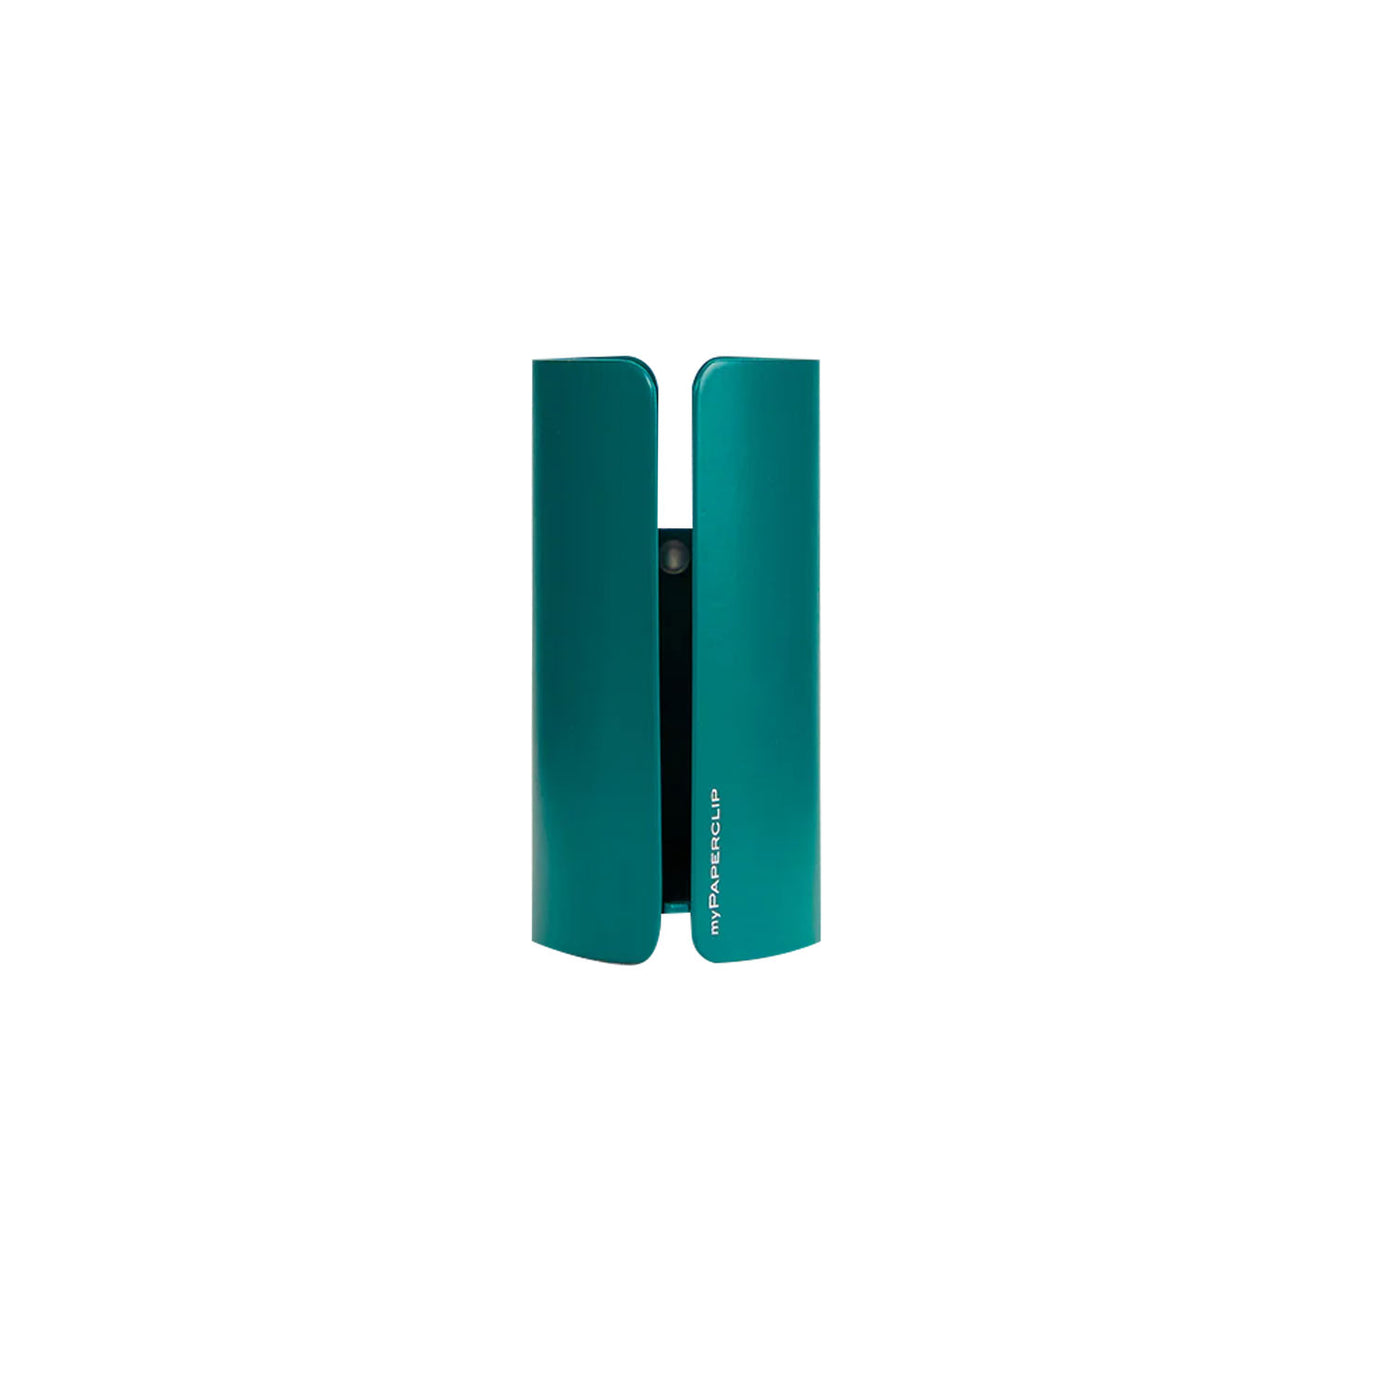 myPAPERCLIP Metal Pen Stand - Green 1